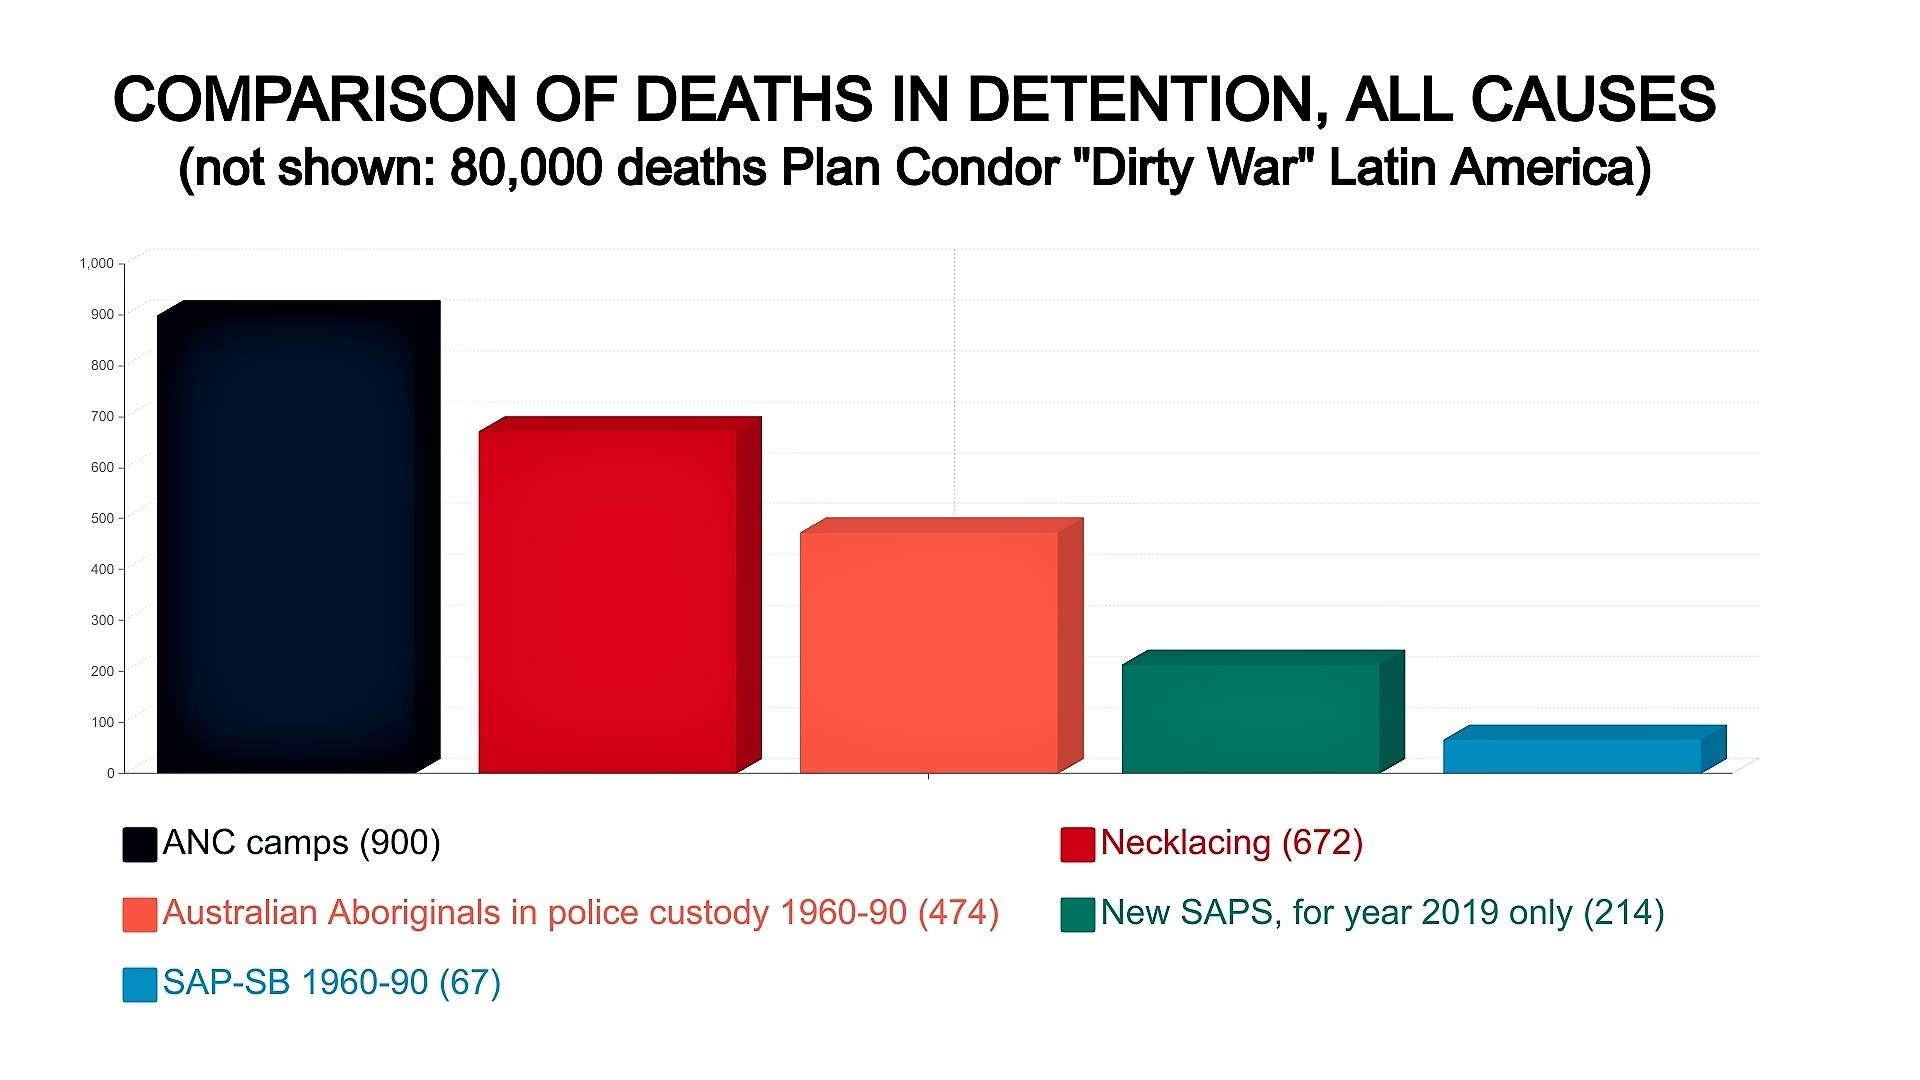 Nongqai Table comparing deaths in SAP-SB detention form all causes